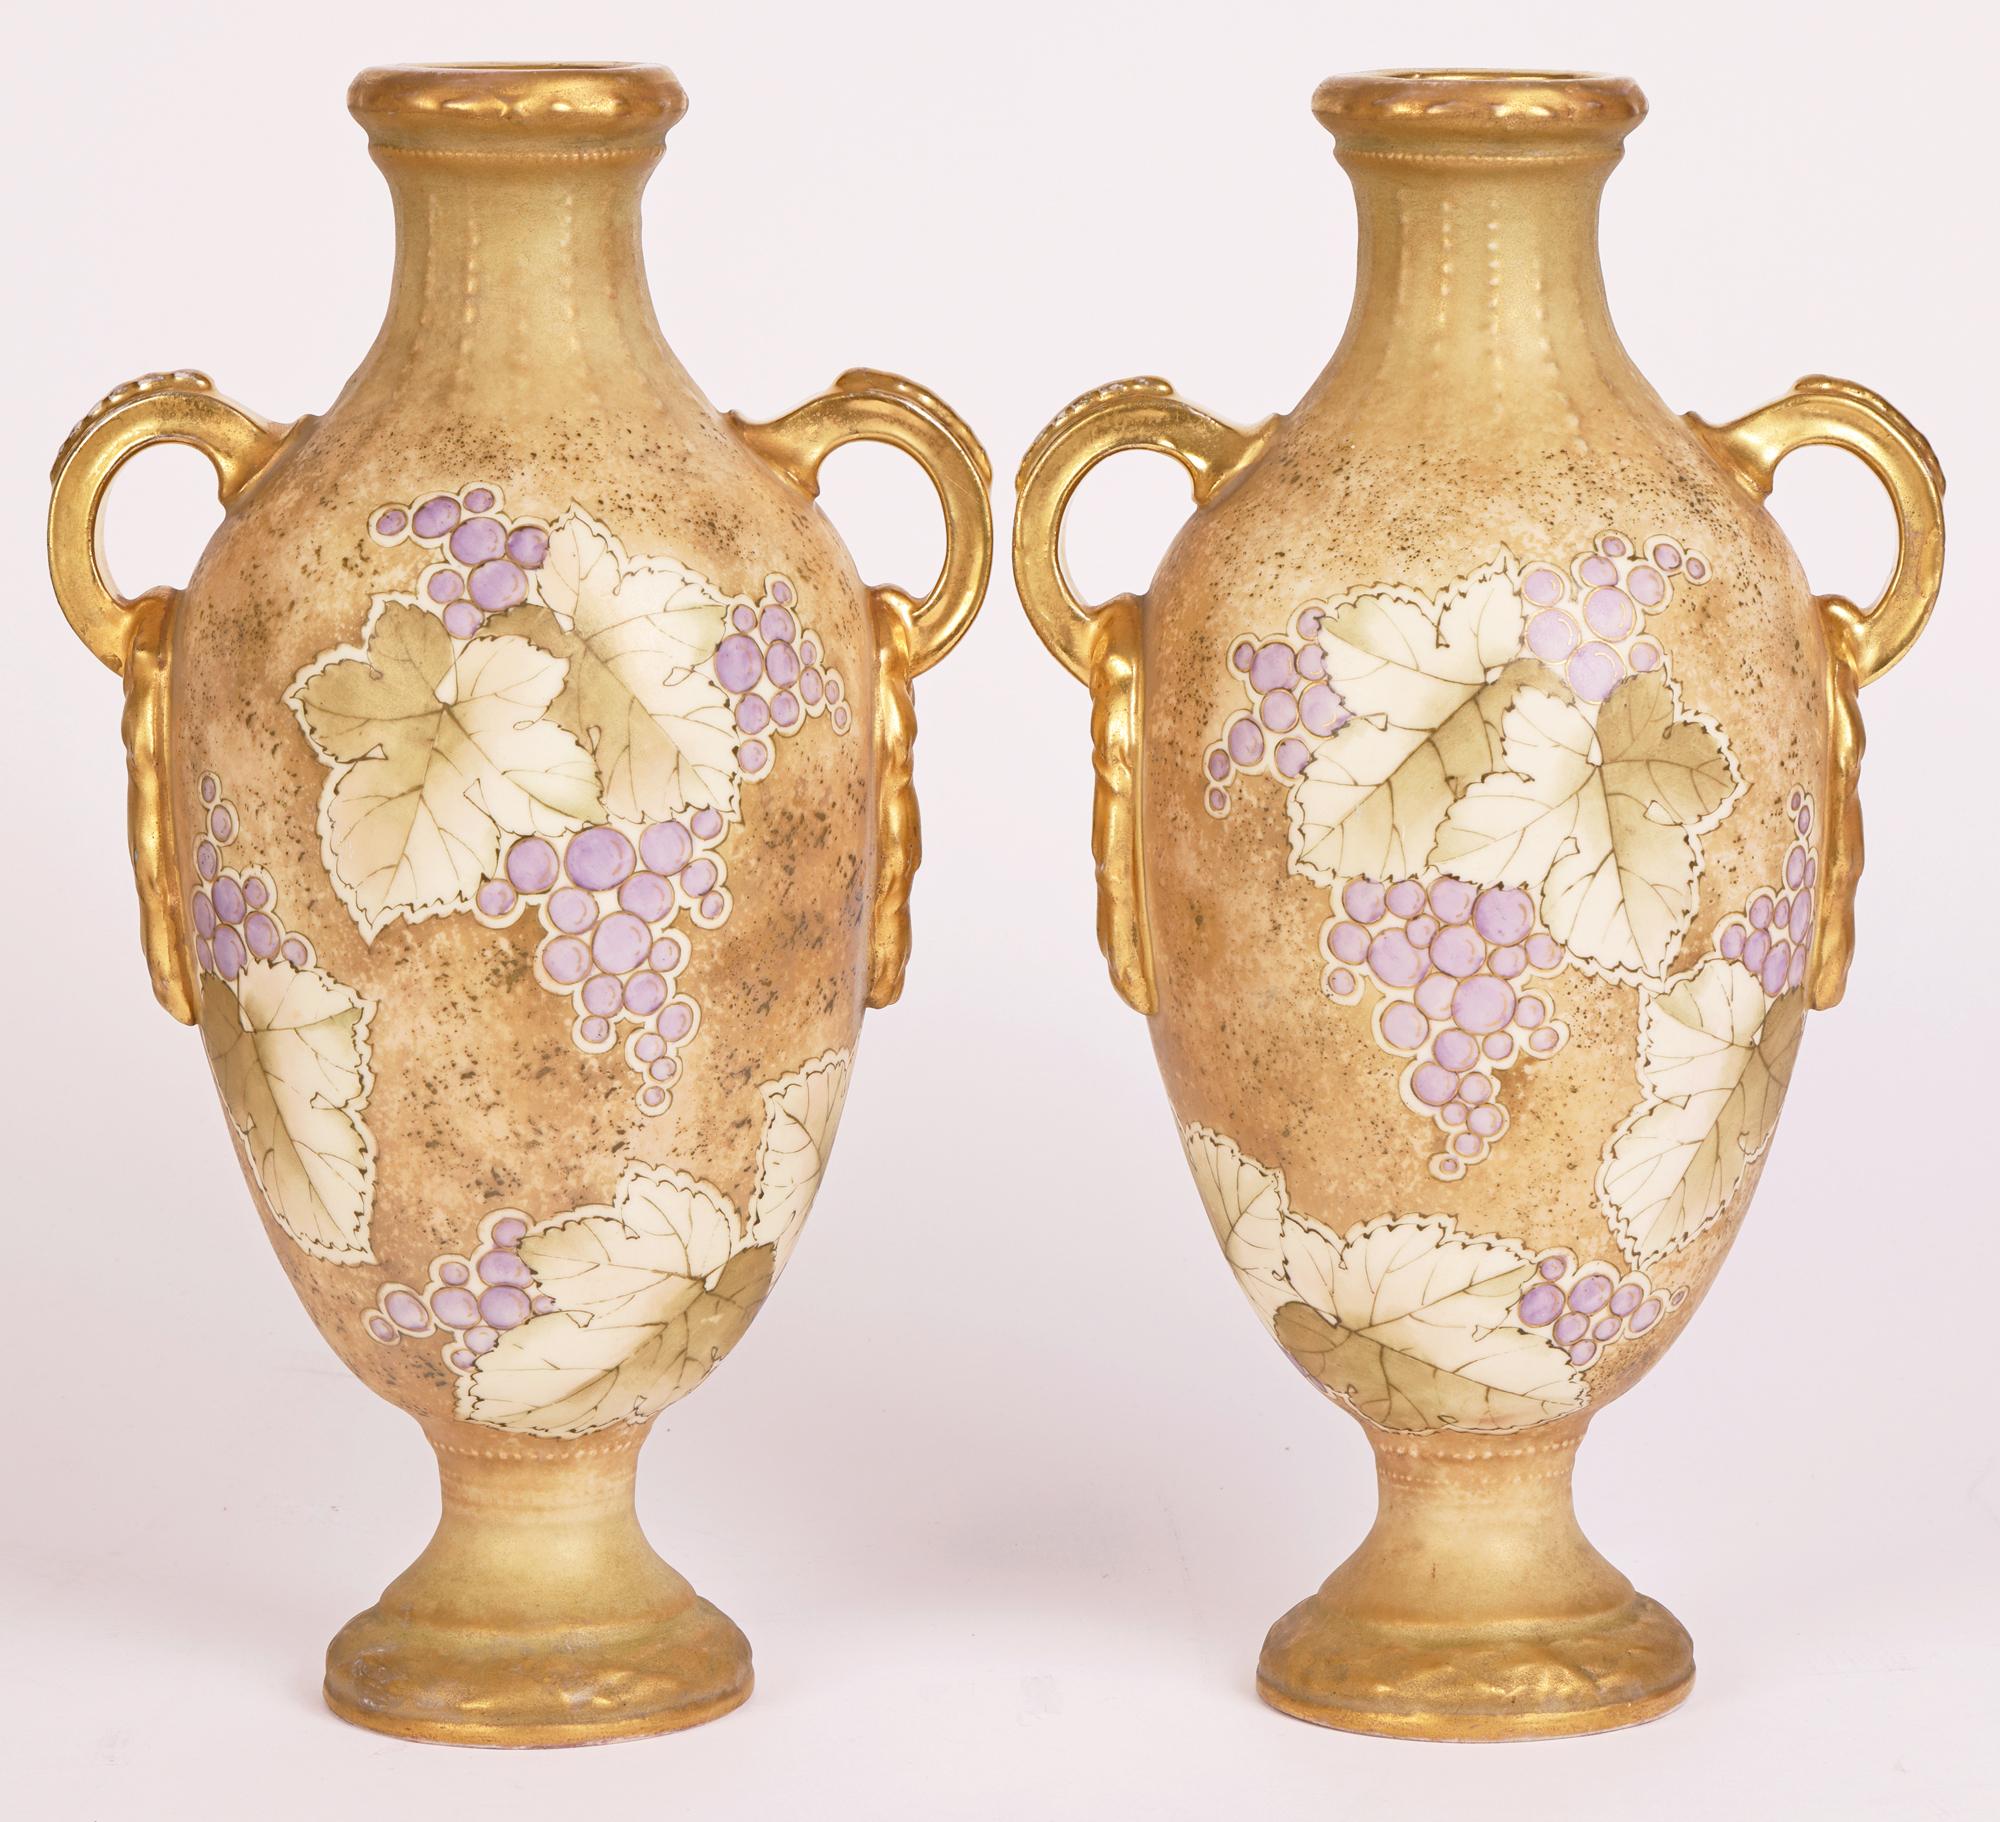 Turn Teplitz RSK Amphora Pair Art Nouveau Hand-Painted Twin Handled Vases In Good Condition For Sale In Bishop's Stortford, Hertfordshire